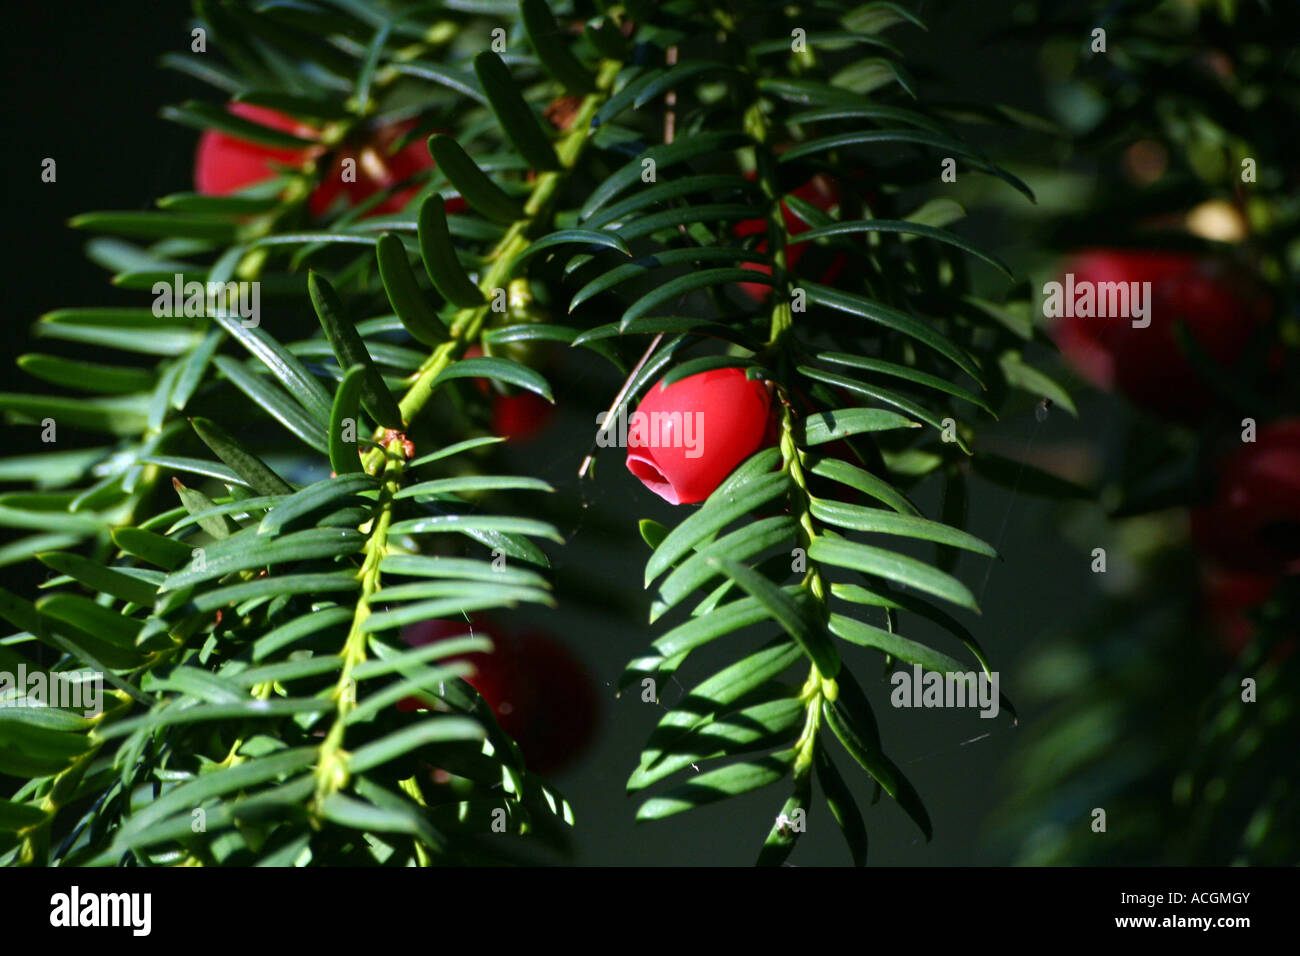 Detail of red berry and green needle branch of yew tree taxus baccata Stock Photo